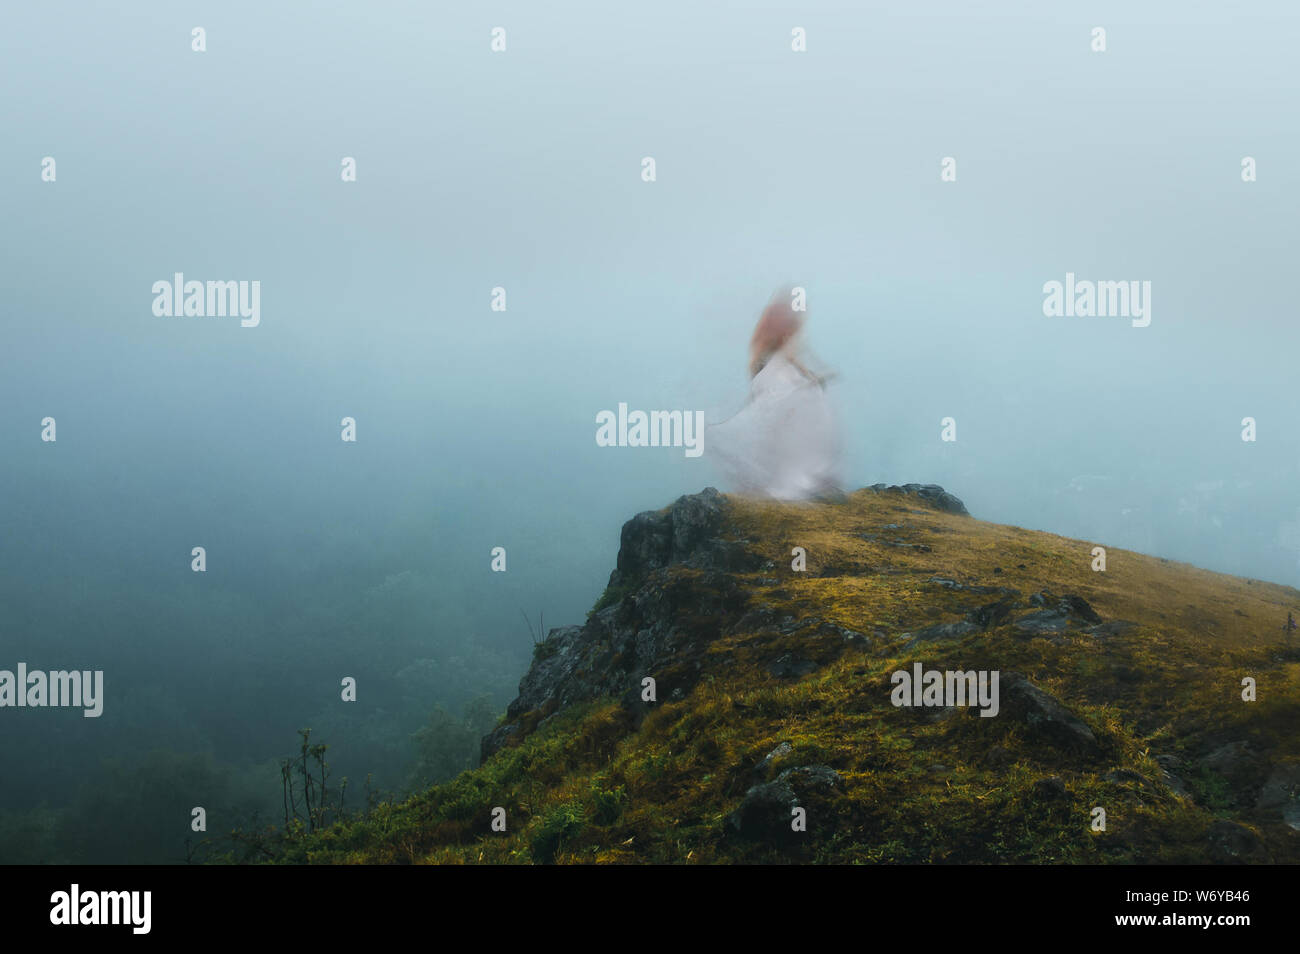 A spooky, blurred, ghostly woman with a white dress, standing on a cliff face looking out on a moody foggy day Stock Photo